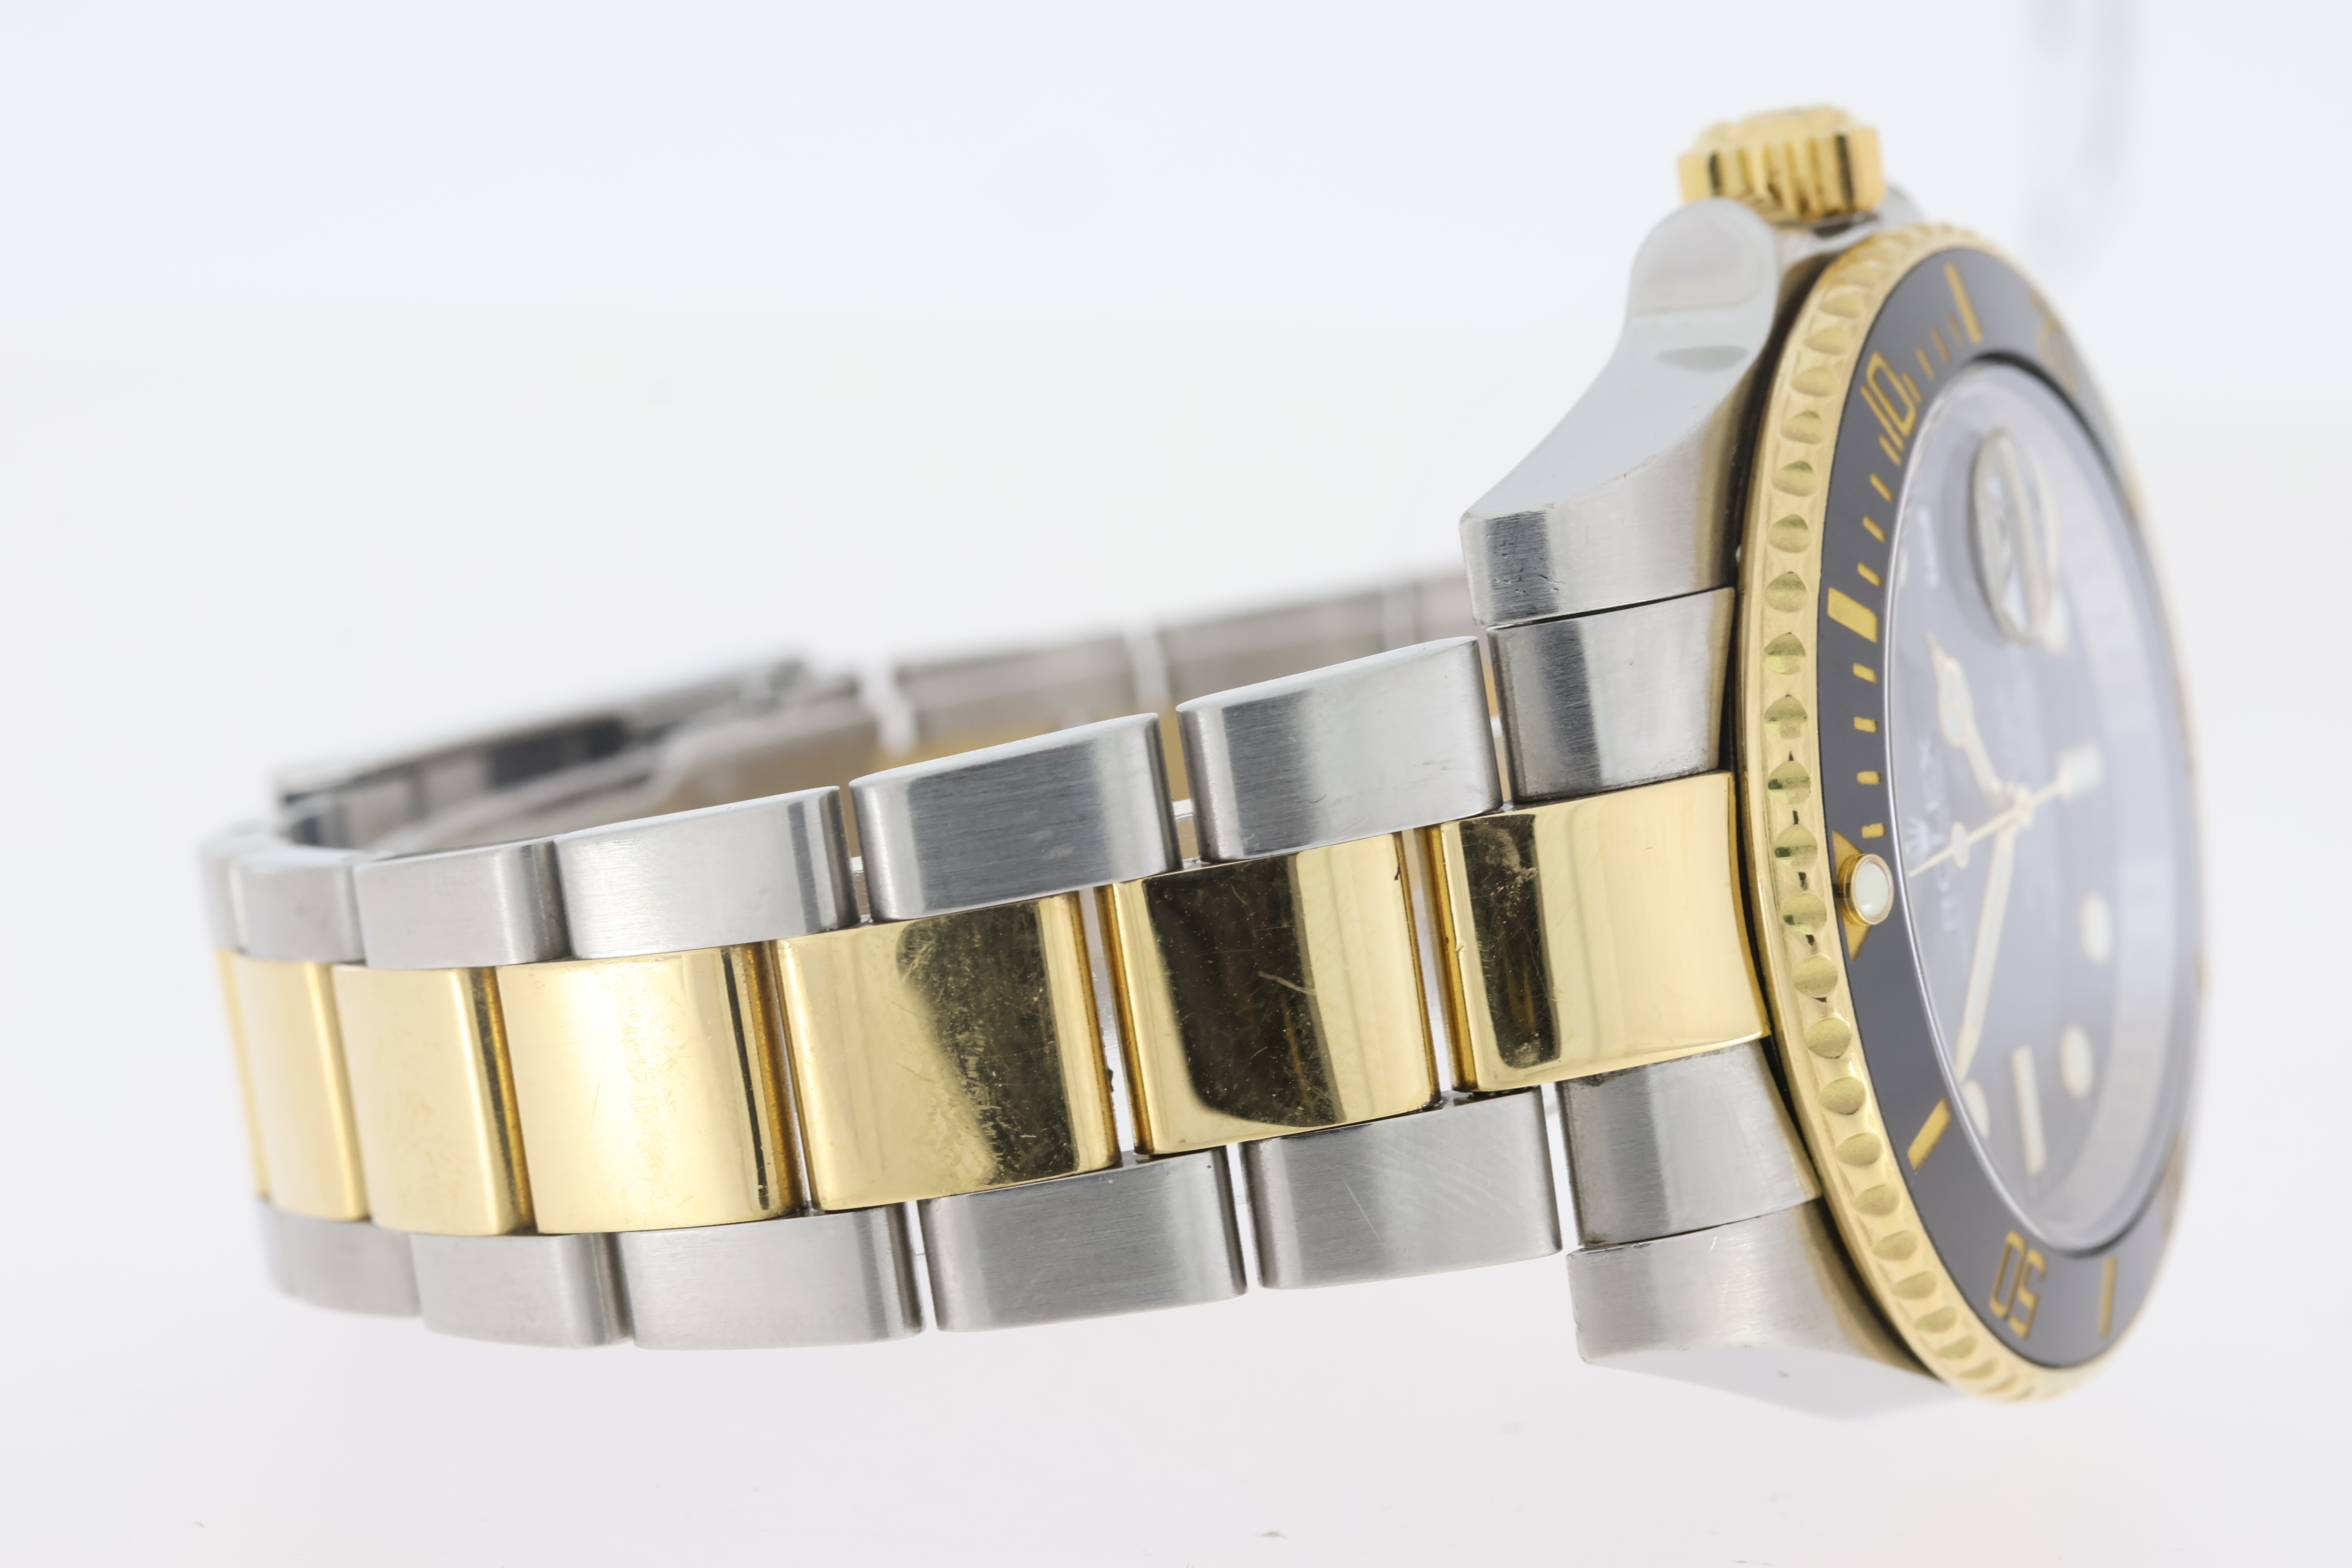 Rolex Submariner Date Reference 116613LN Steel and Gold - Image 5 of 8